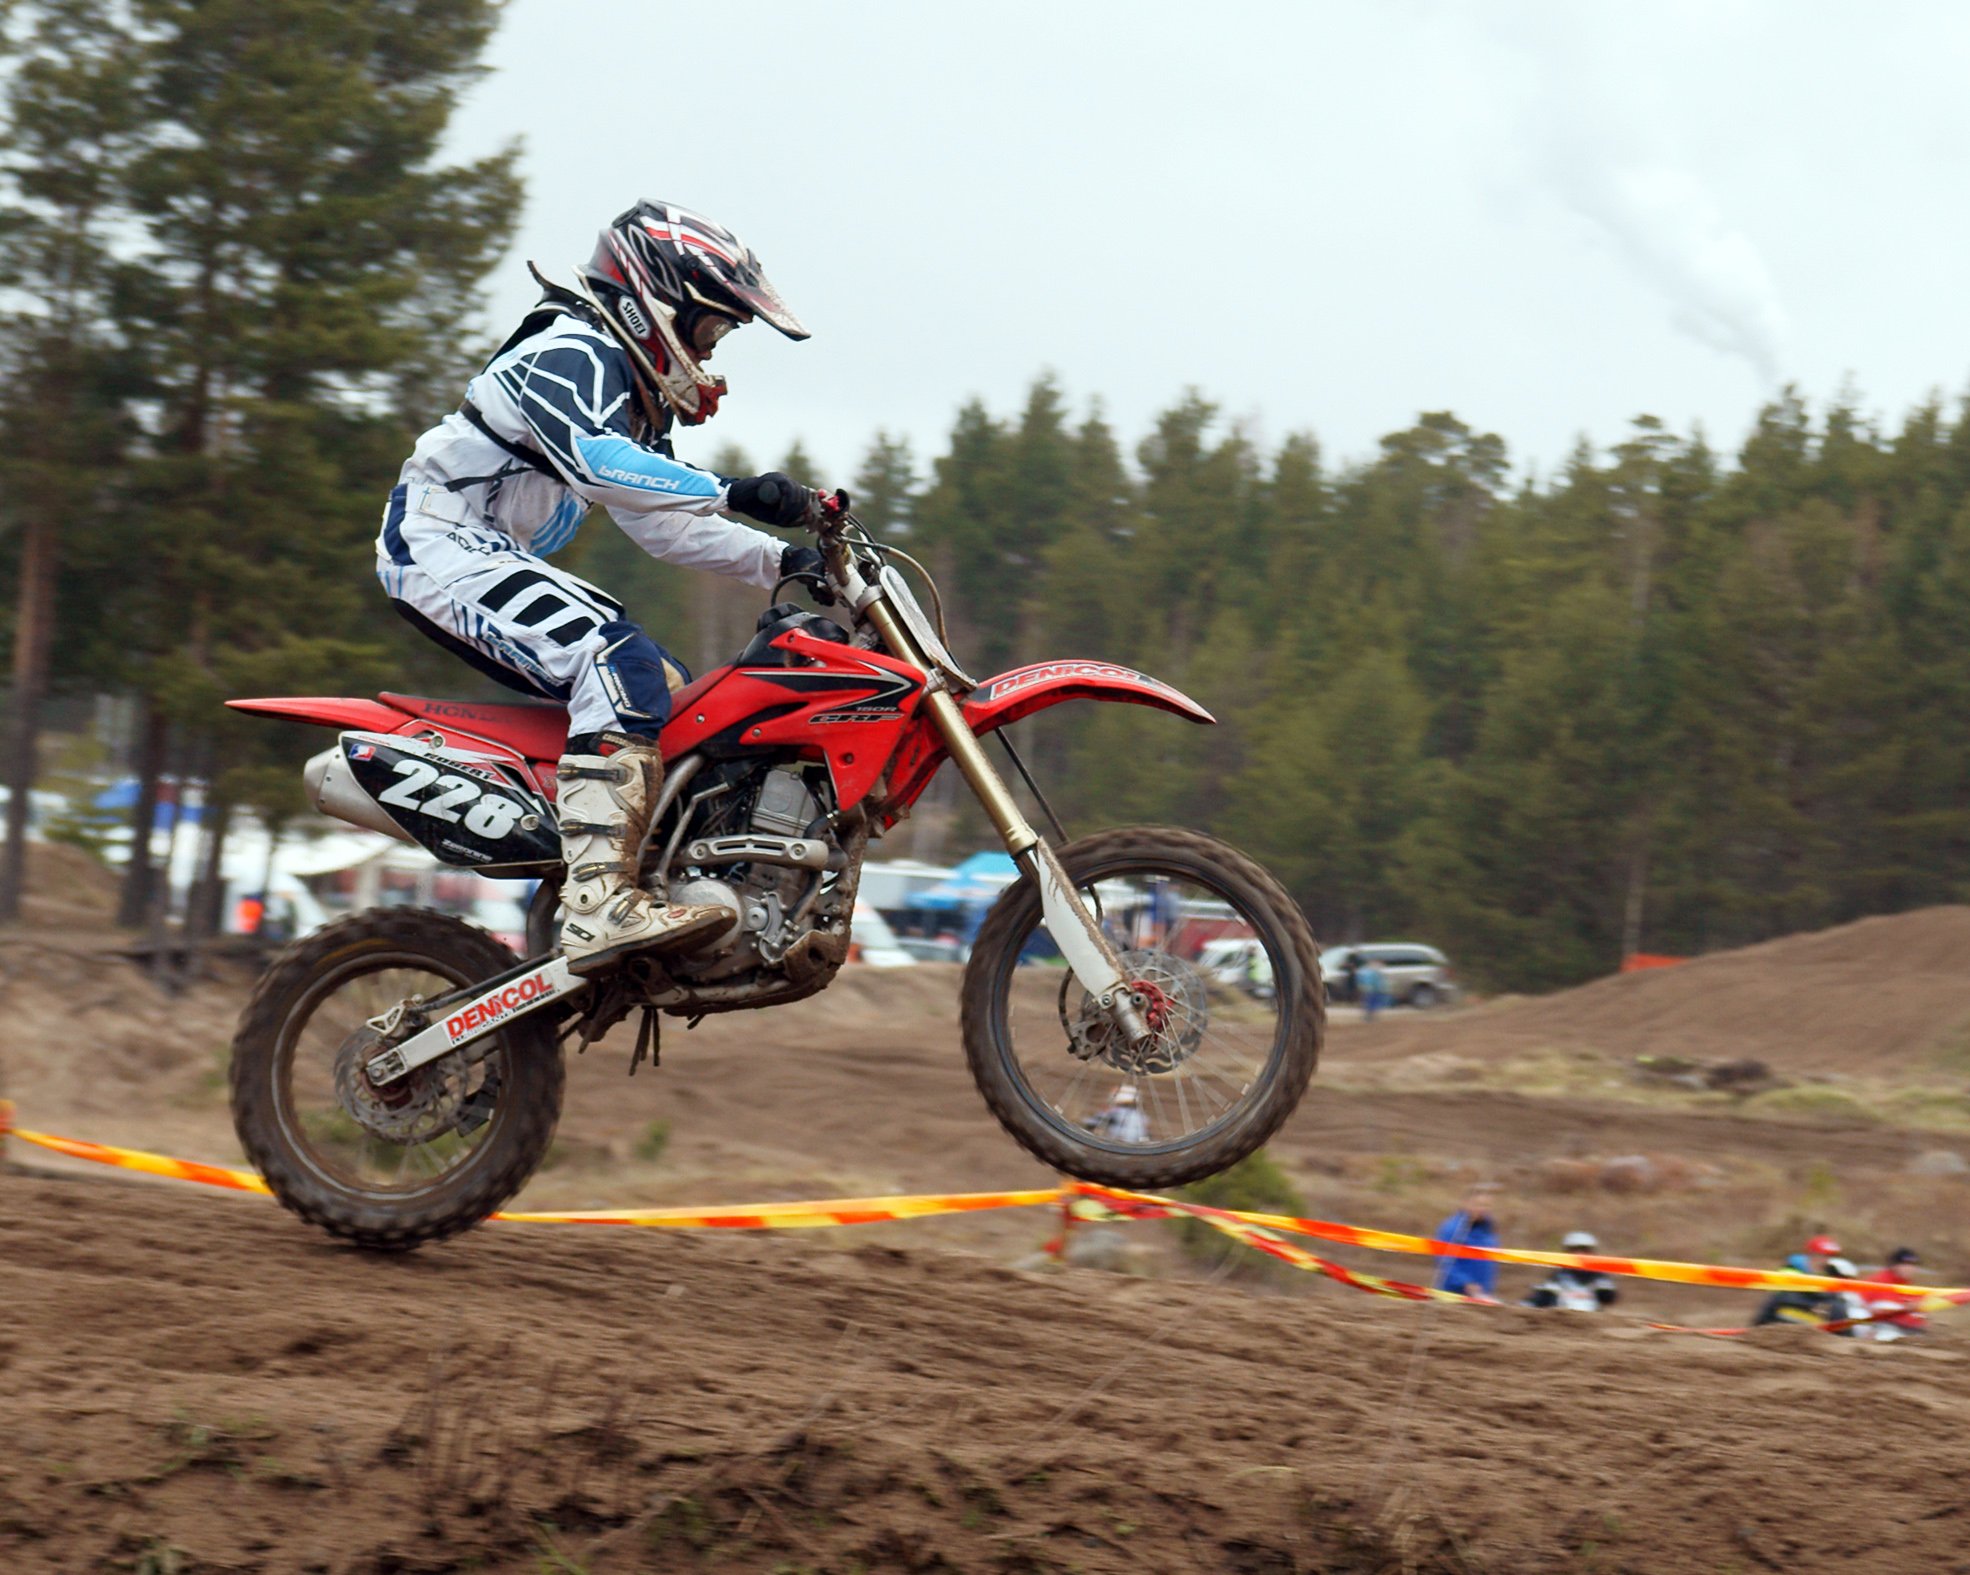 A competitor taking part in the Yyteri SM Motocross competition in Yyteri on May 9, 2010 | Photo: Wikimedia/kallerna